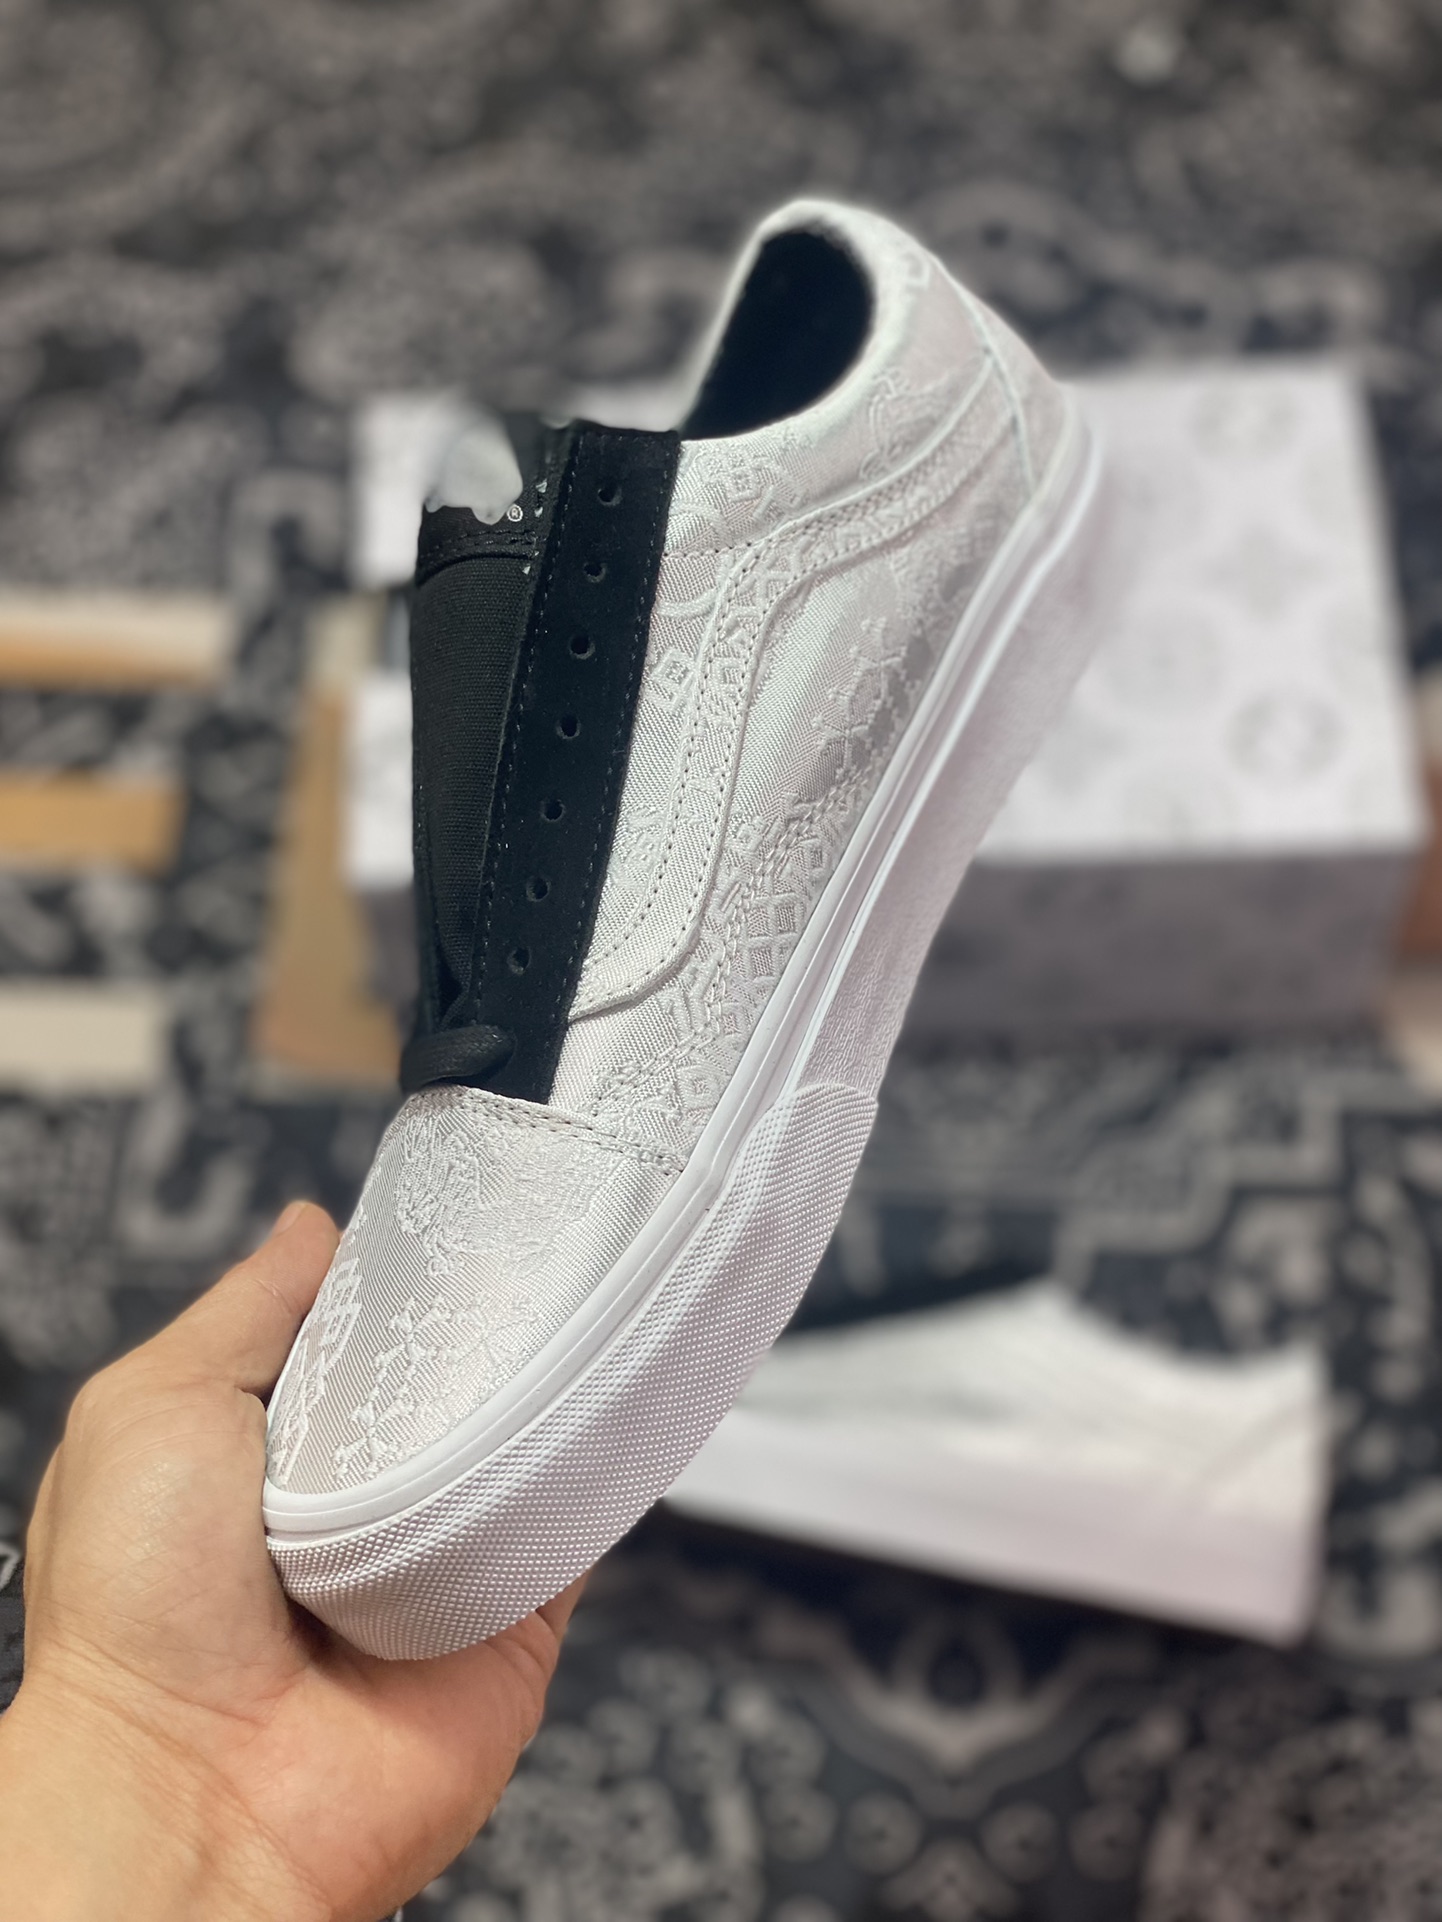 Clot x Fragment Design x Vans upper uses white silk material to cover the shoes